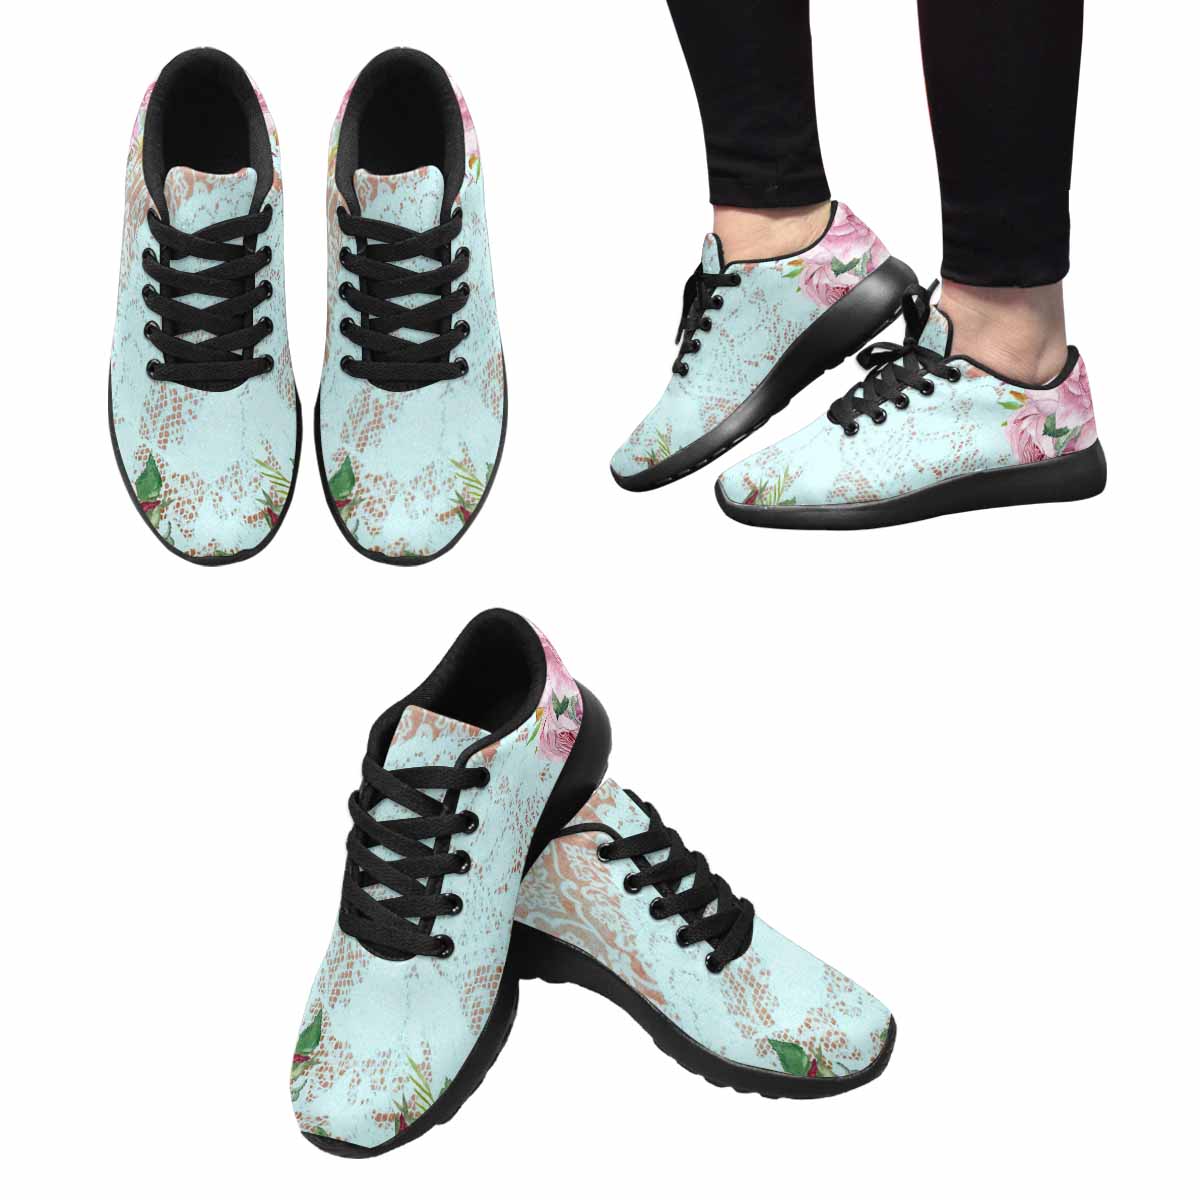 Victorian lace print, womens cute casual or running sneakers, design 24